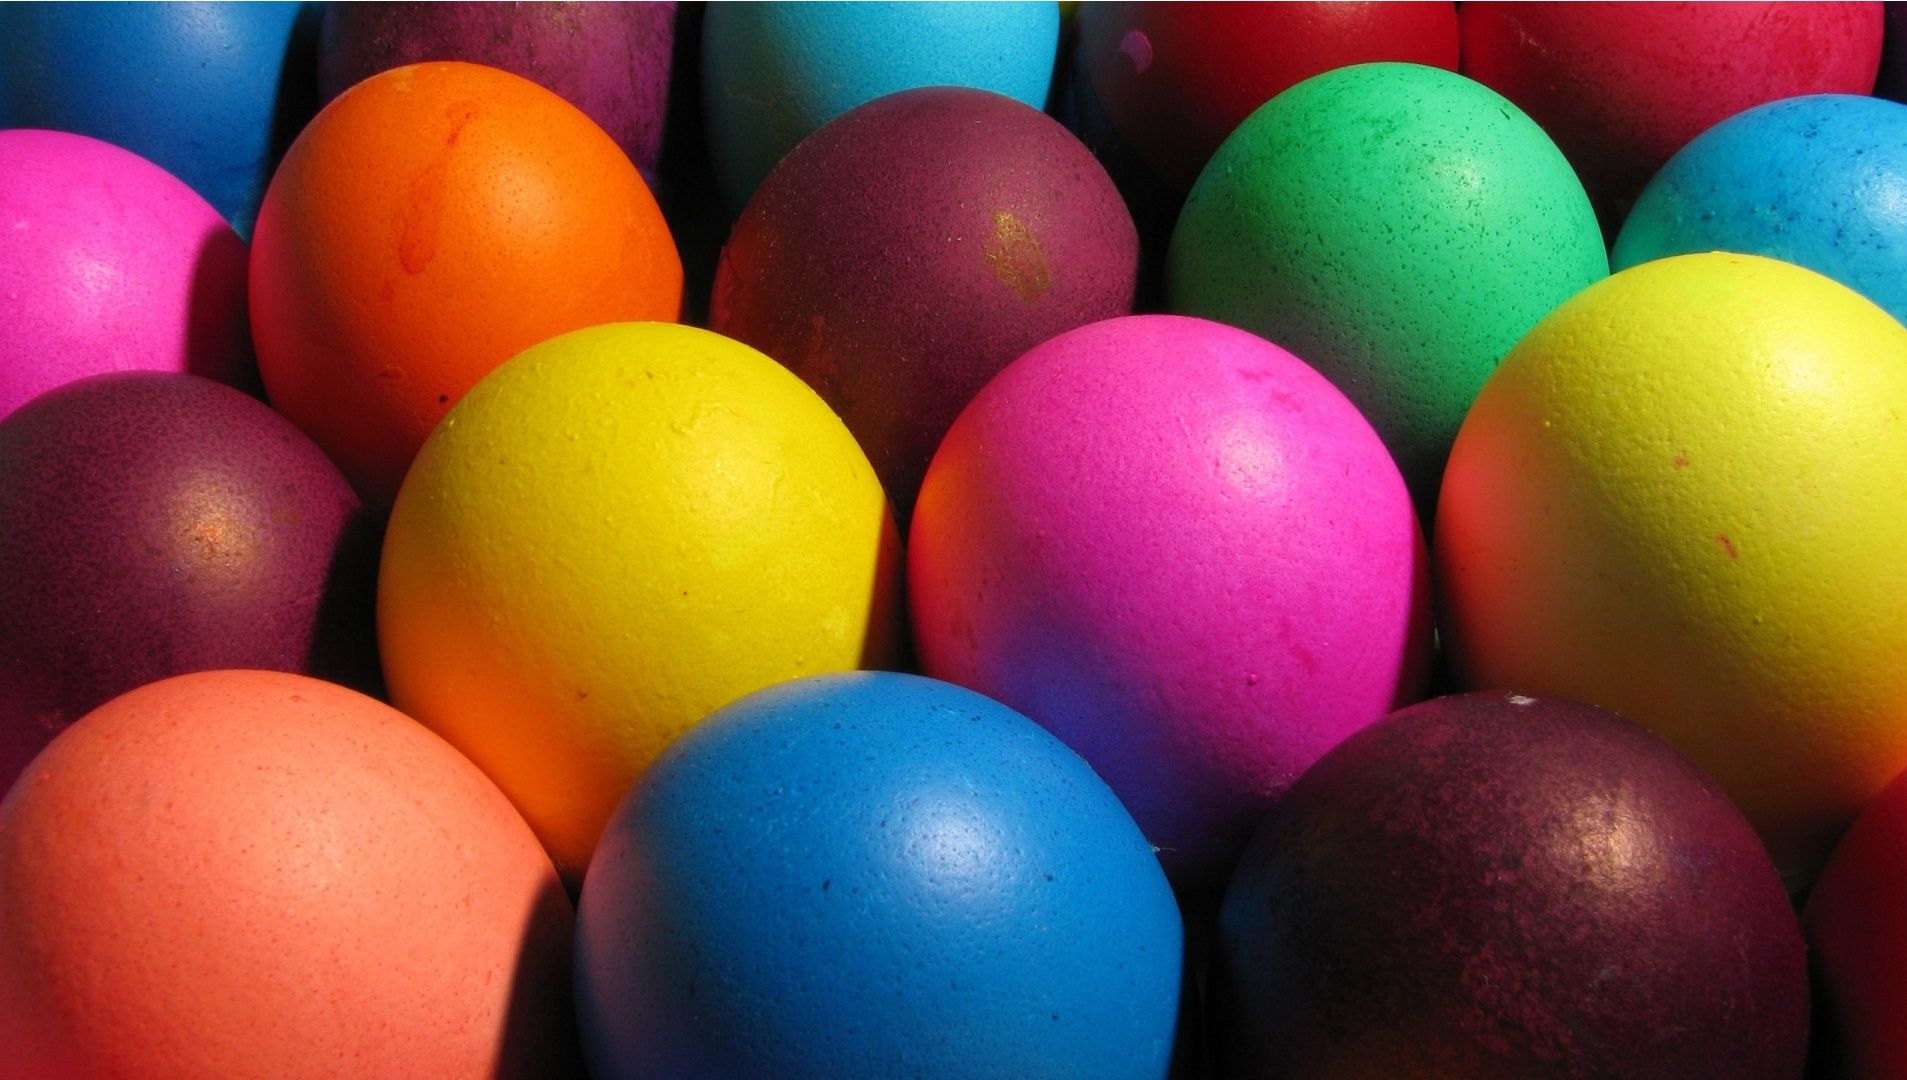 HD wallpaper, Background, Easter, Eggs, Colorful